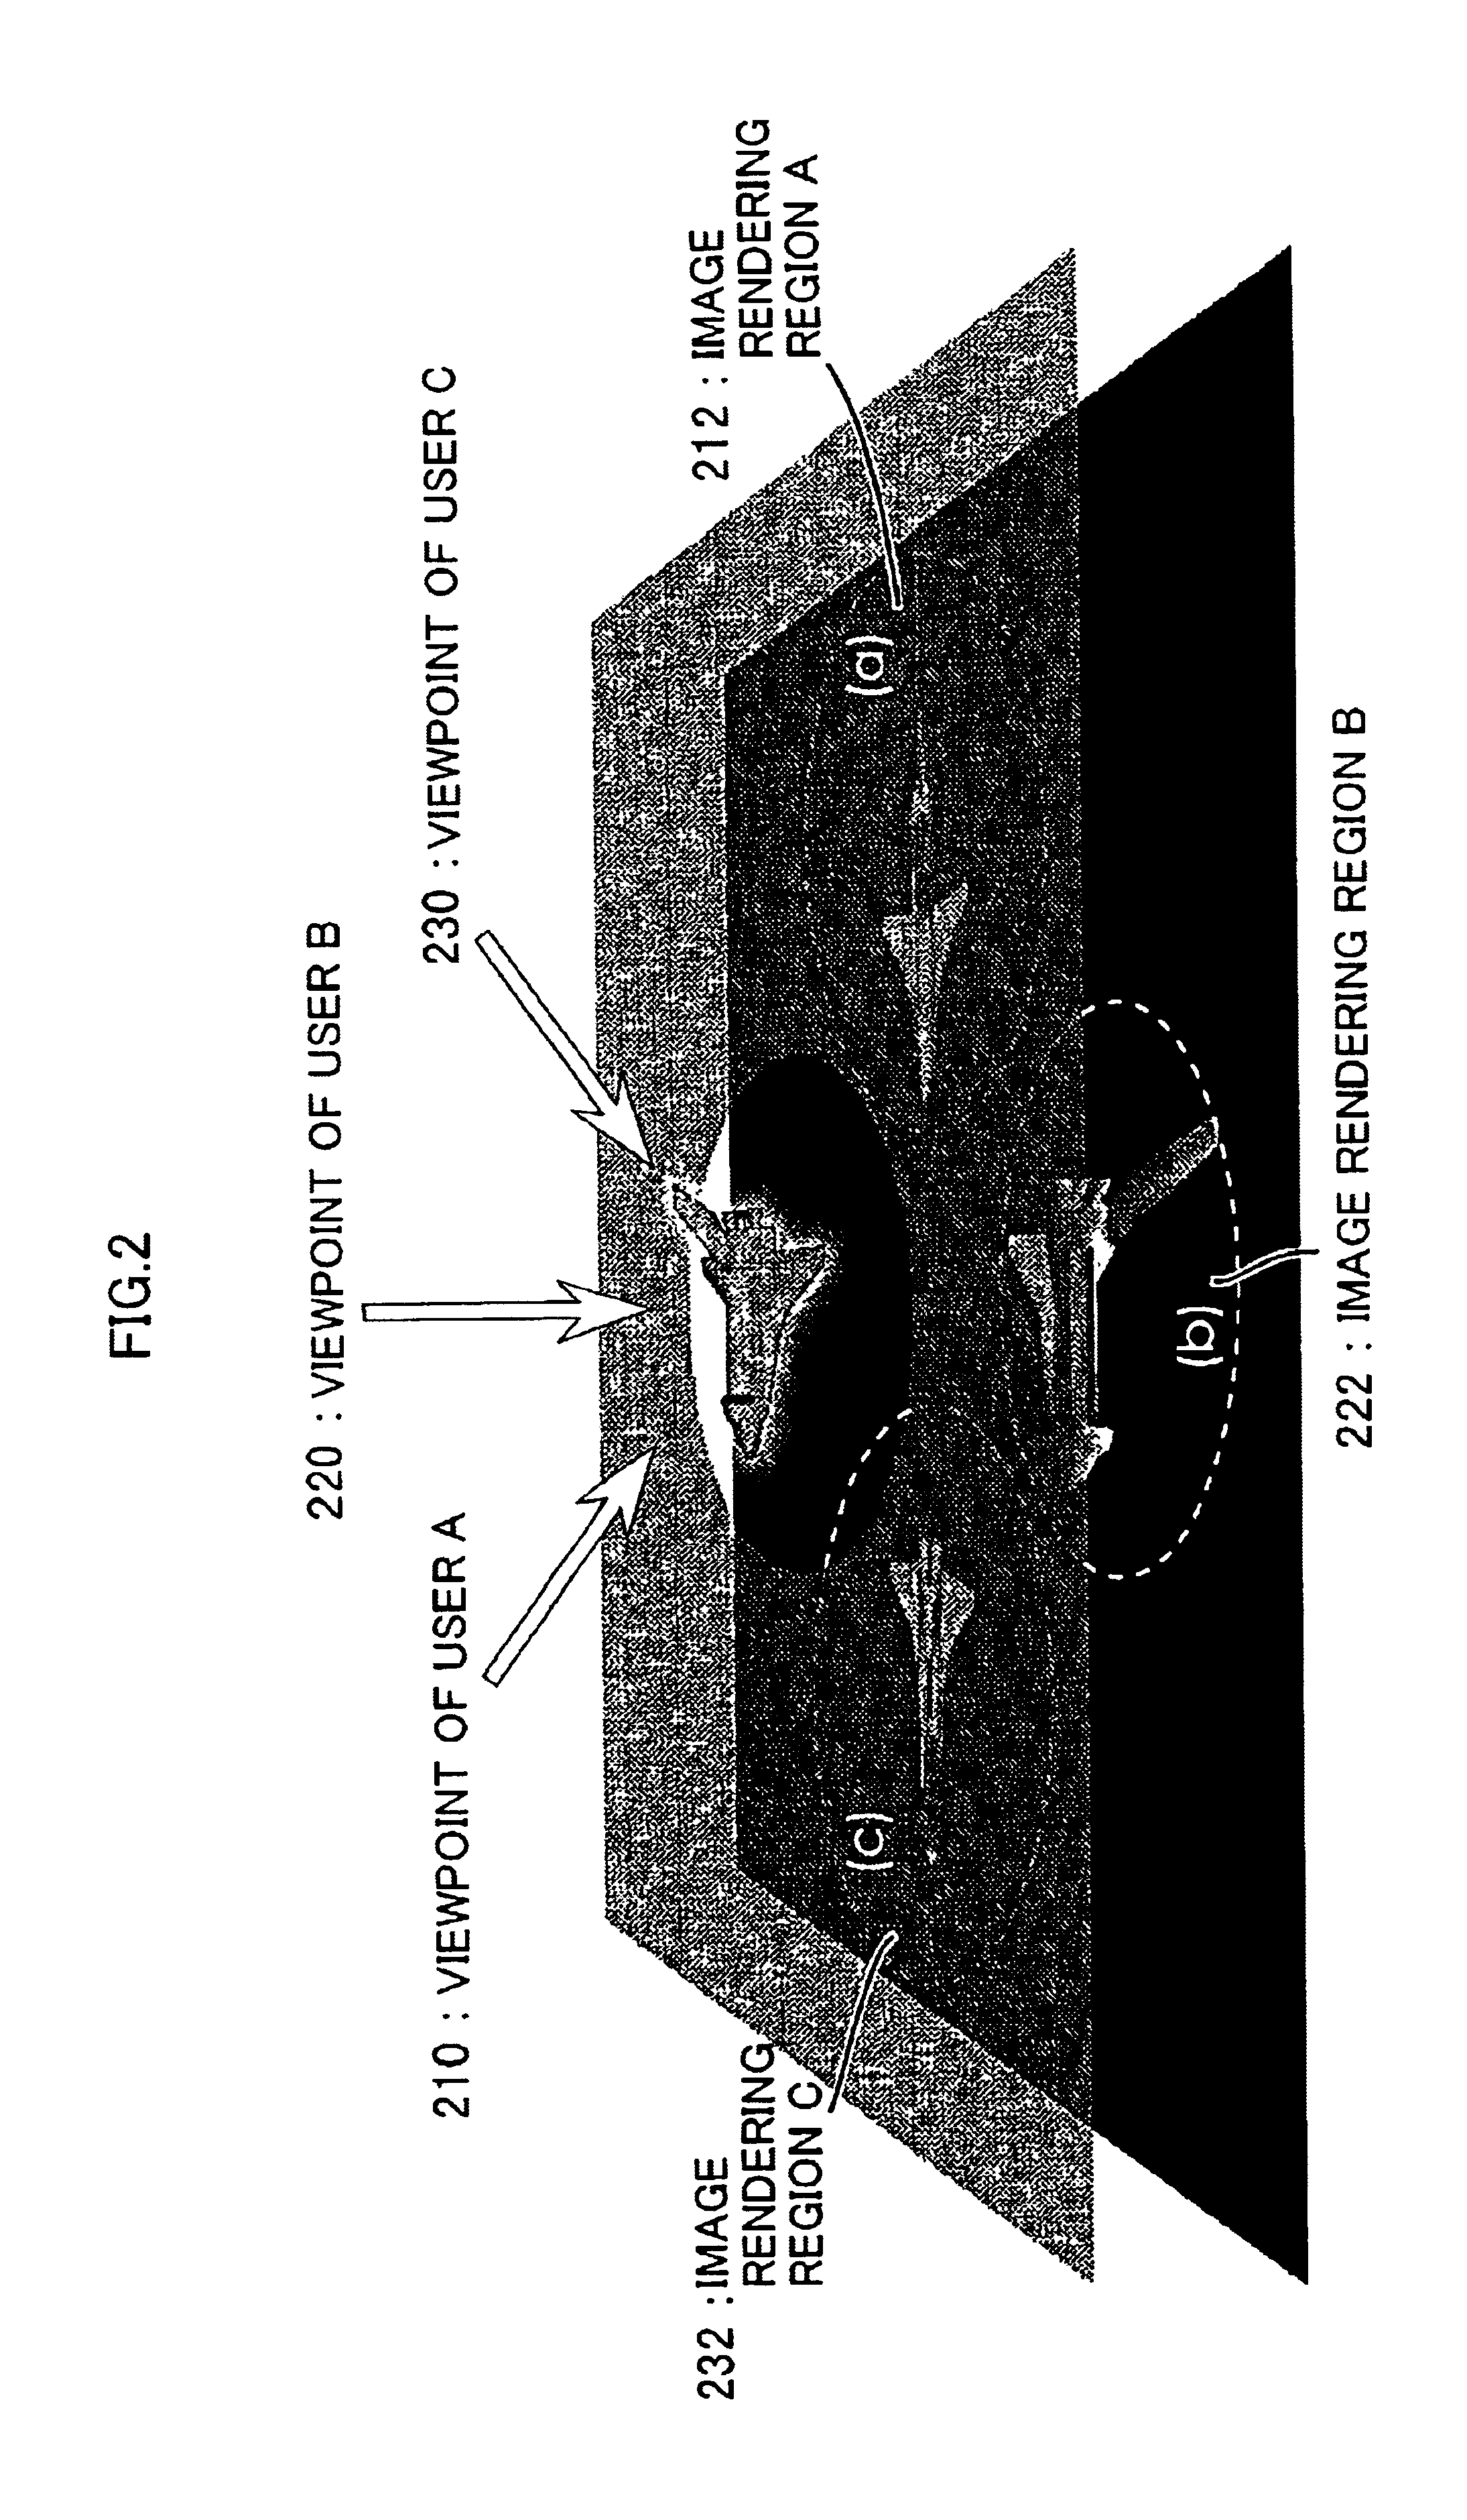 Multi-person shared display device